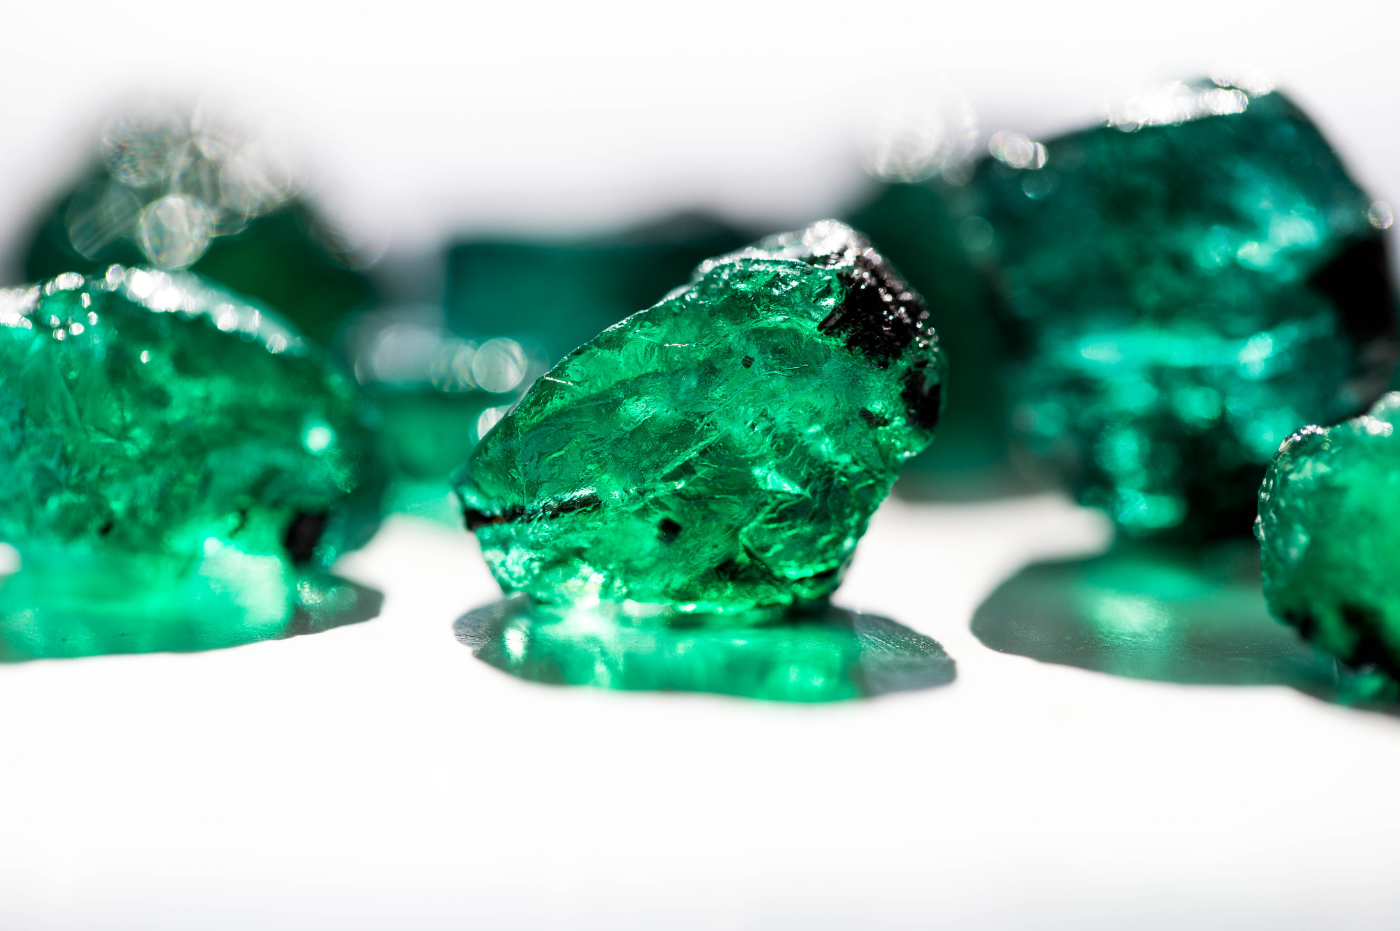 Coloured gems outperform jewellery as investments